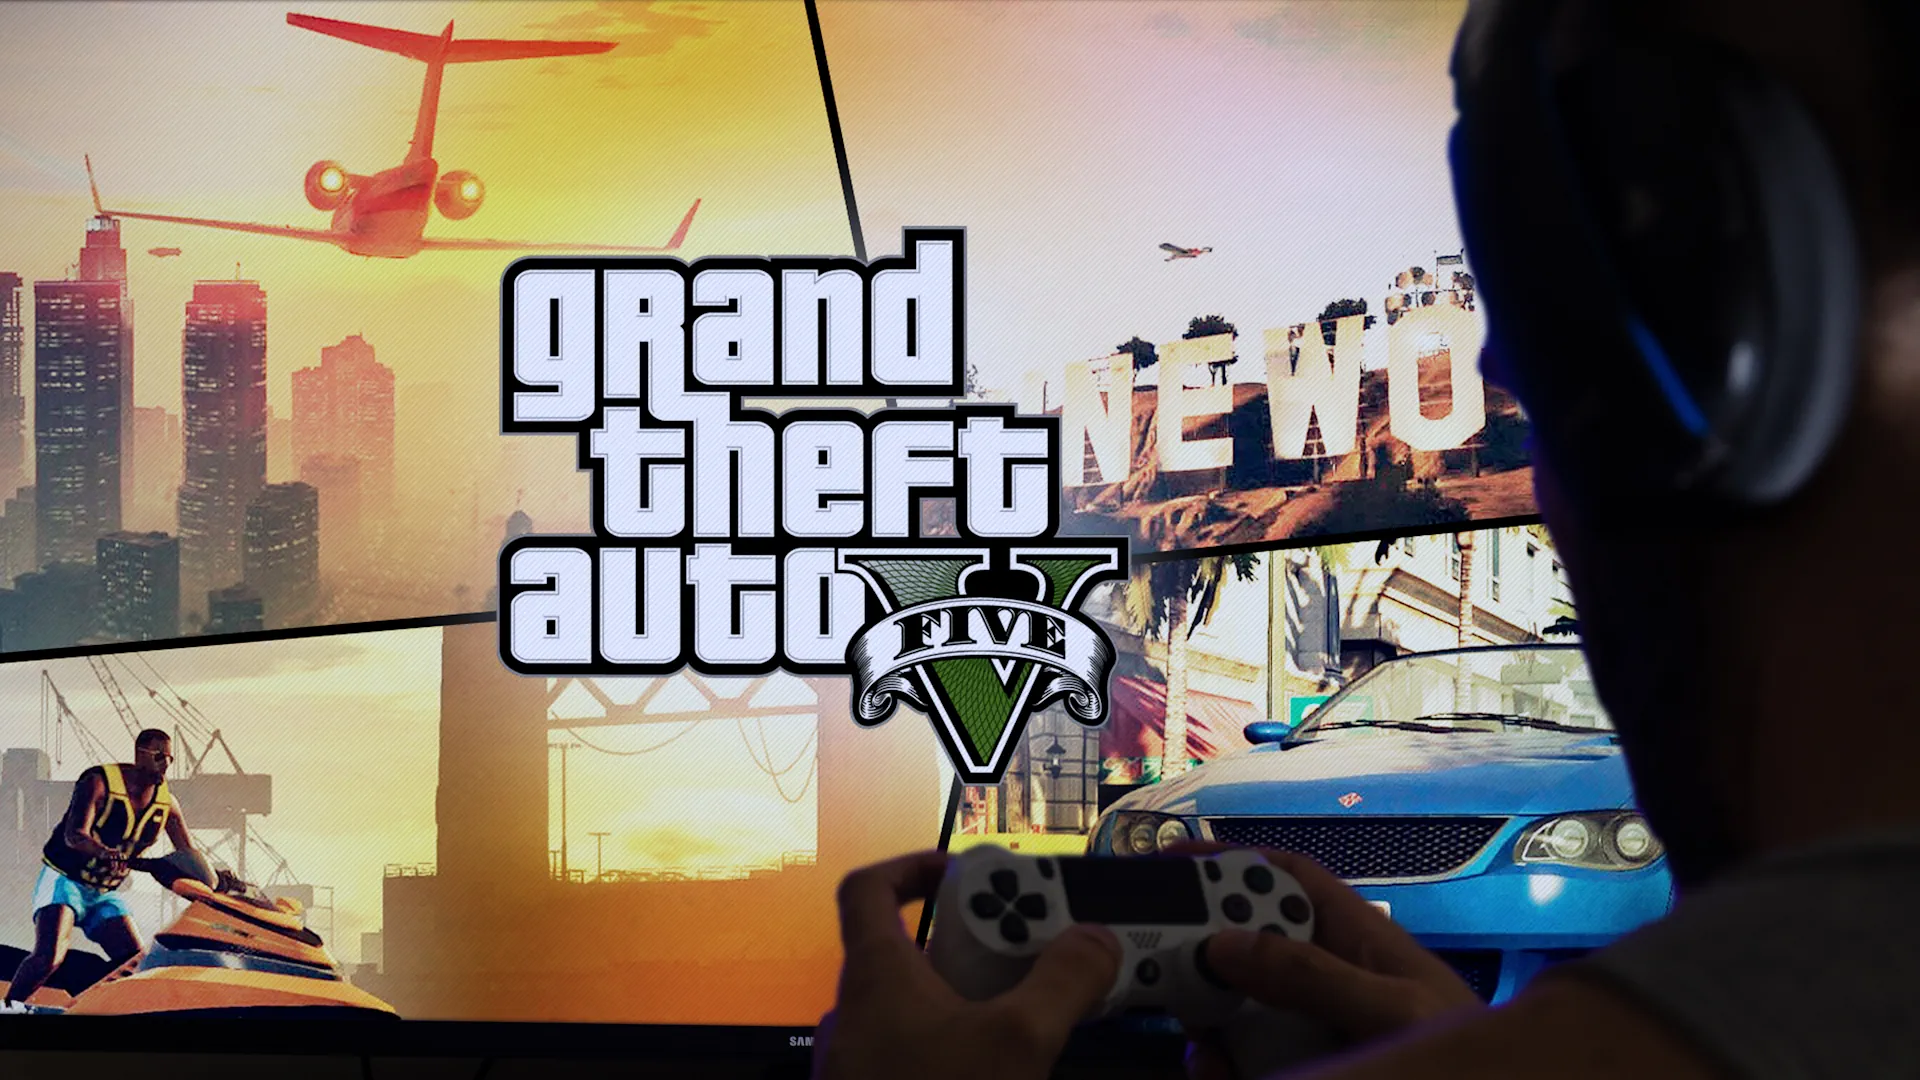 While we wait for the sixth, GTA V reaches new numbers – sold 190 million copies